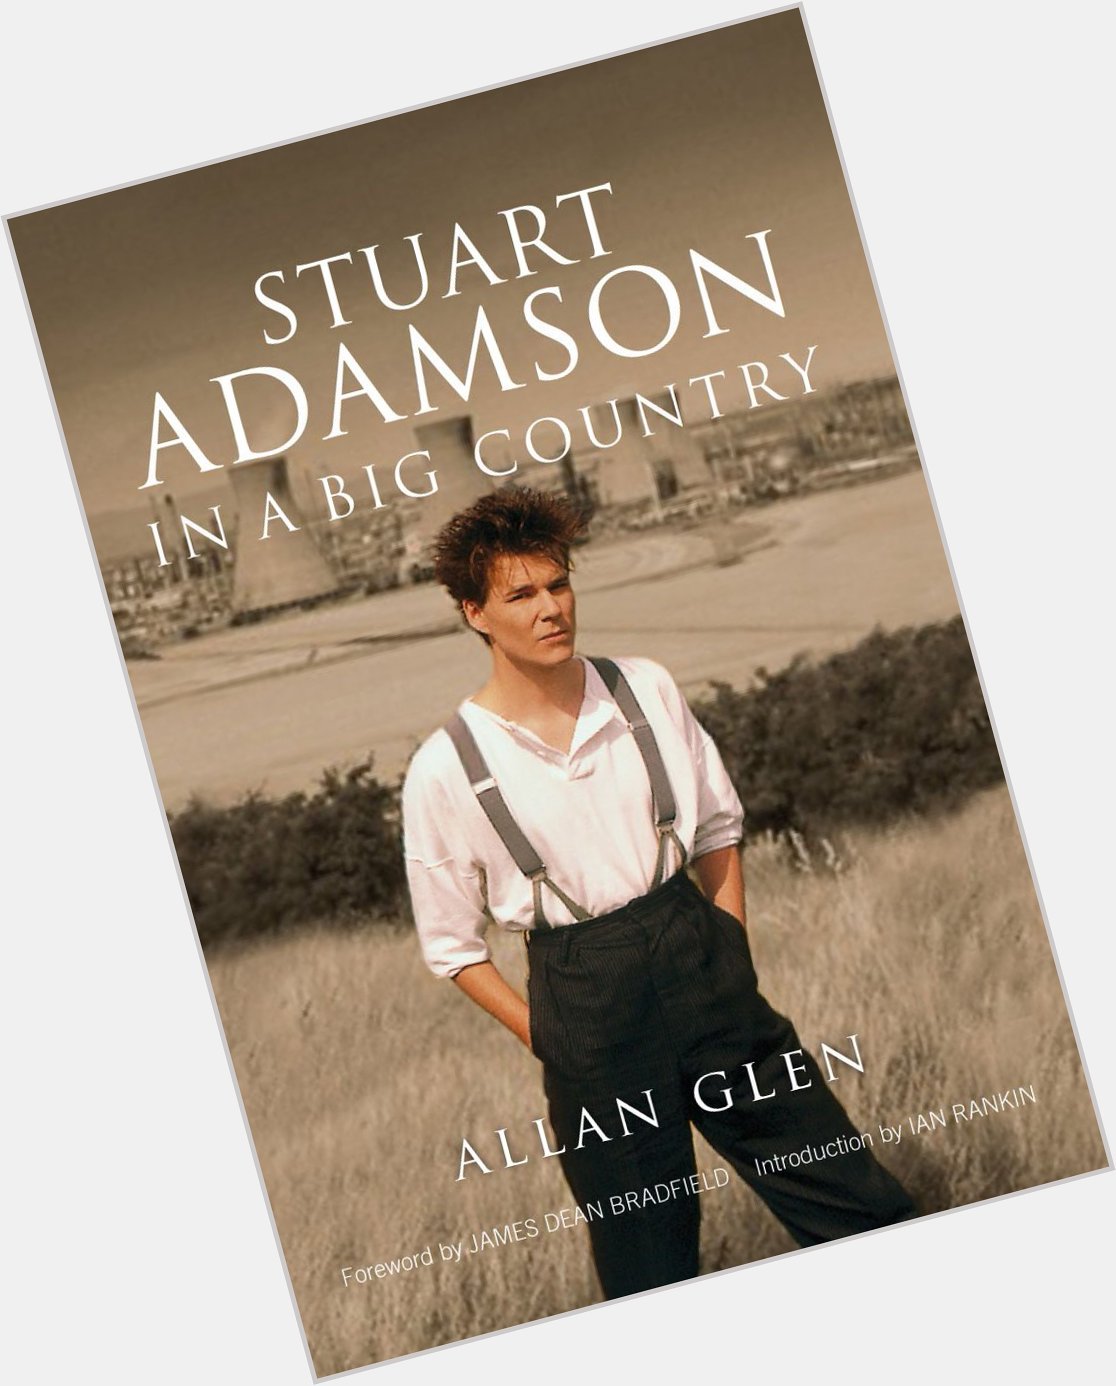 Happy birthday to Stuart Adamson, who would have been 62 today. 